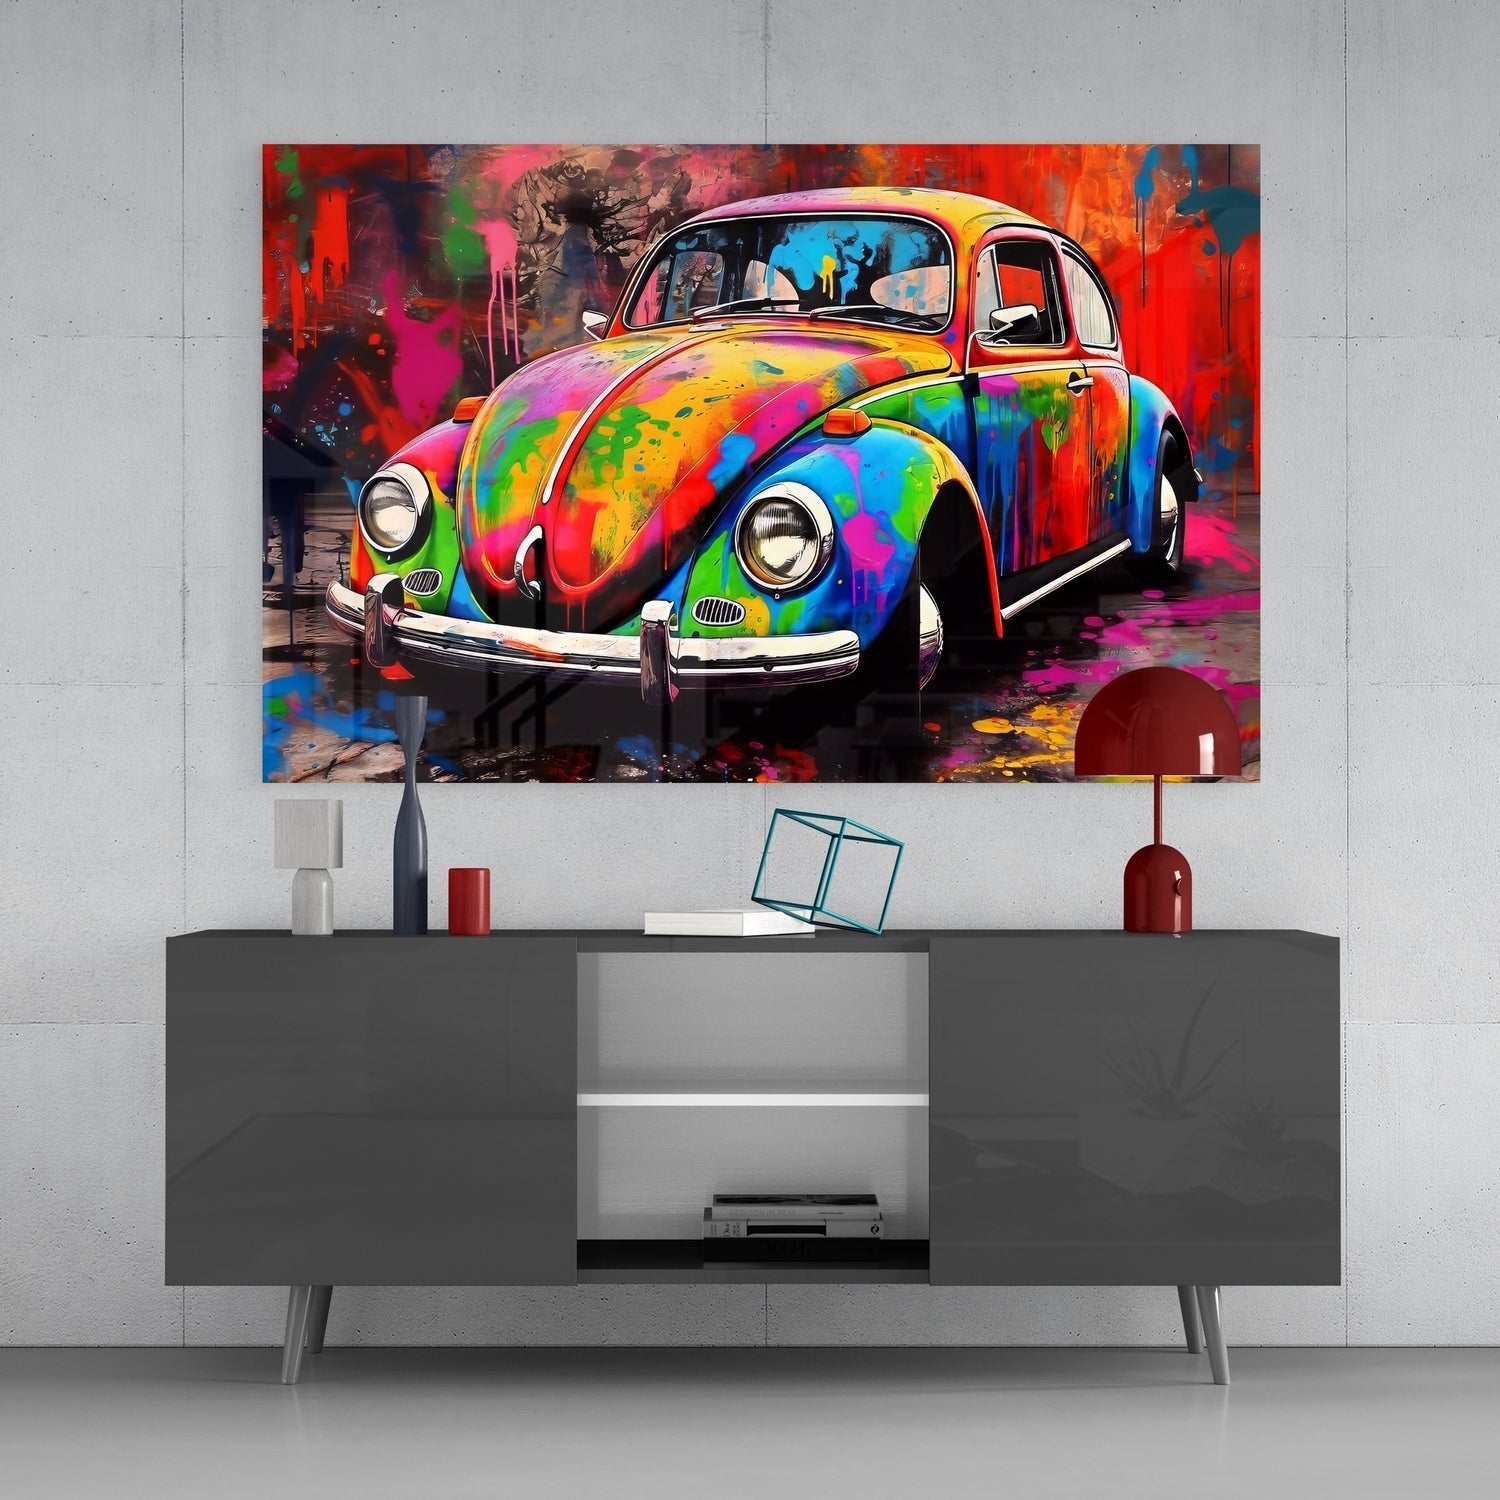 Colourful W Glass Wall Art || Designers Collection